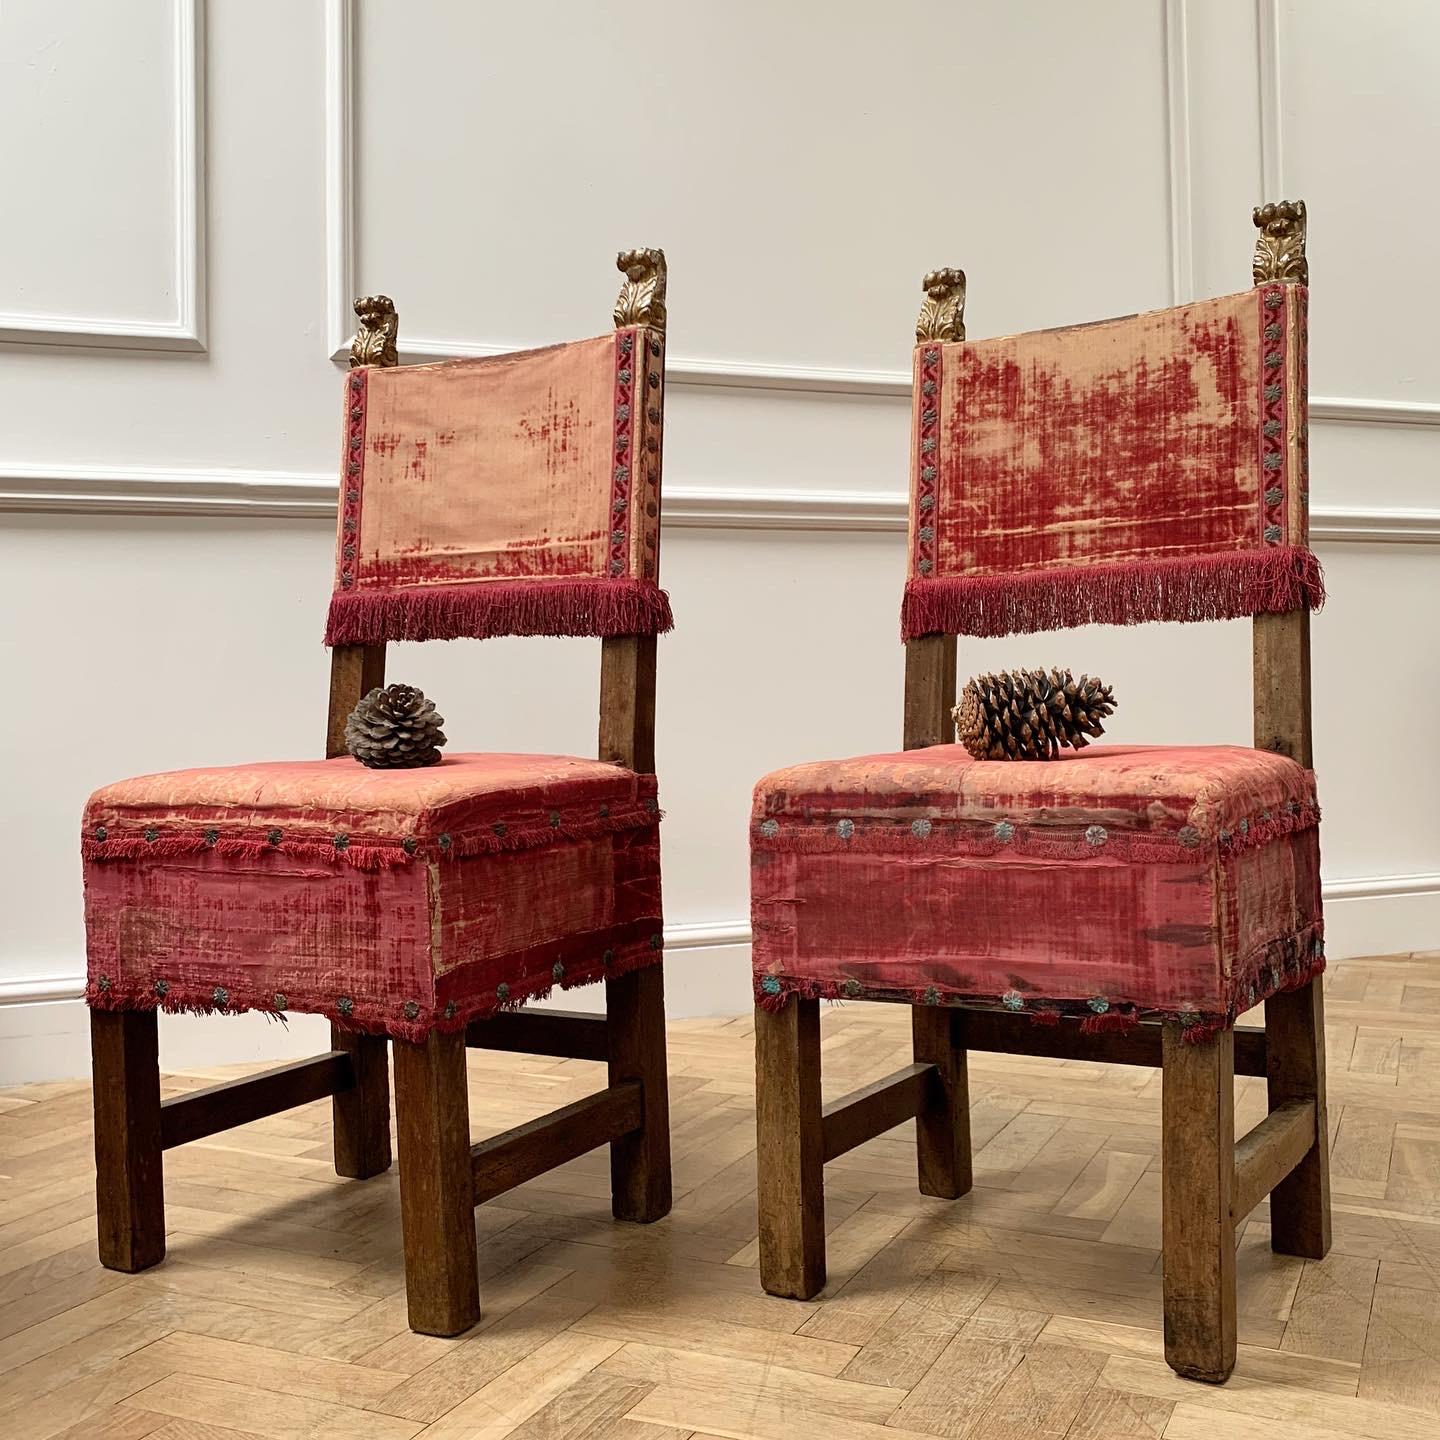 A sumptuous pair of seventeenth century Italian walnut chairs, the backs surmounted by carved and gilt finials with red velvet seats and backs, with red tassel fringing - Ex Ullstein Family Collection

Italian, 17th century.